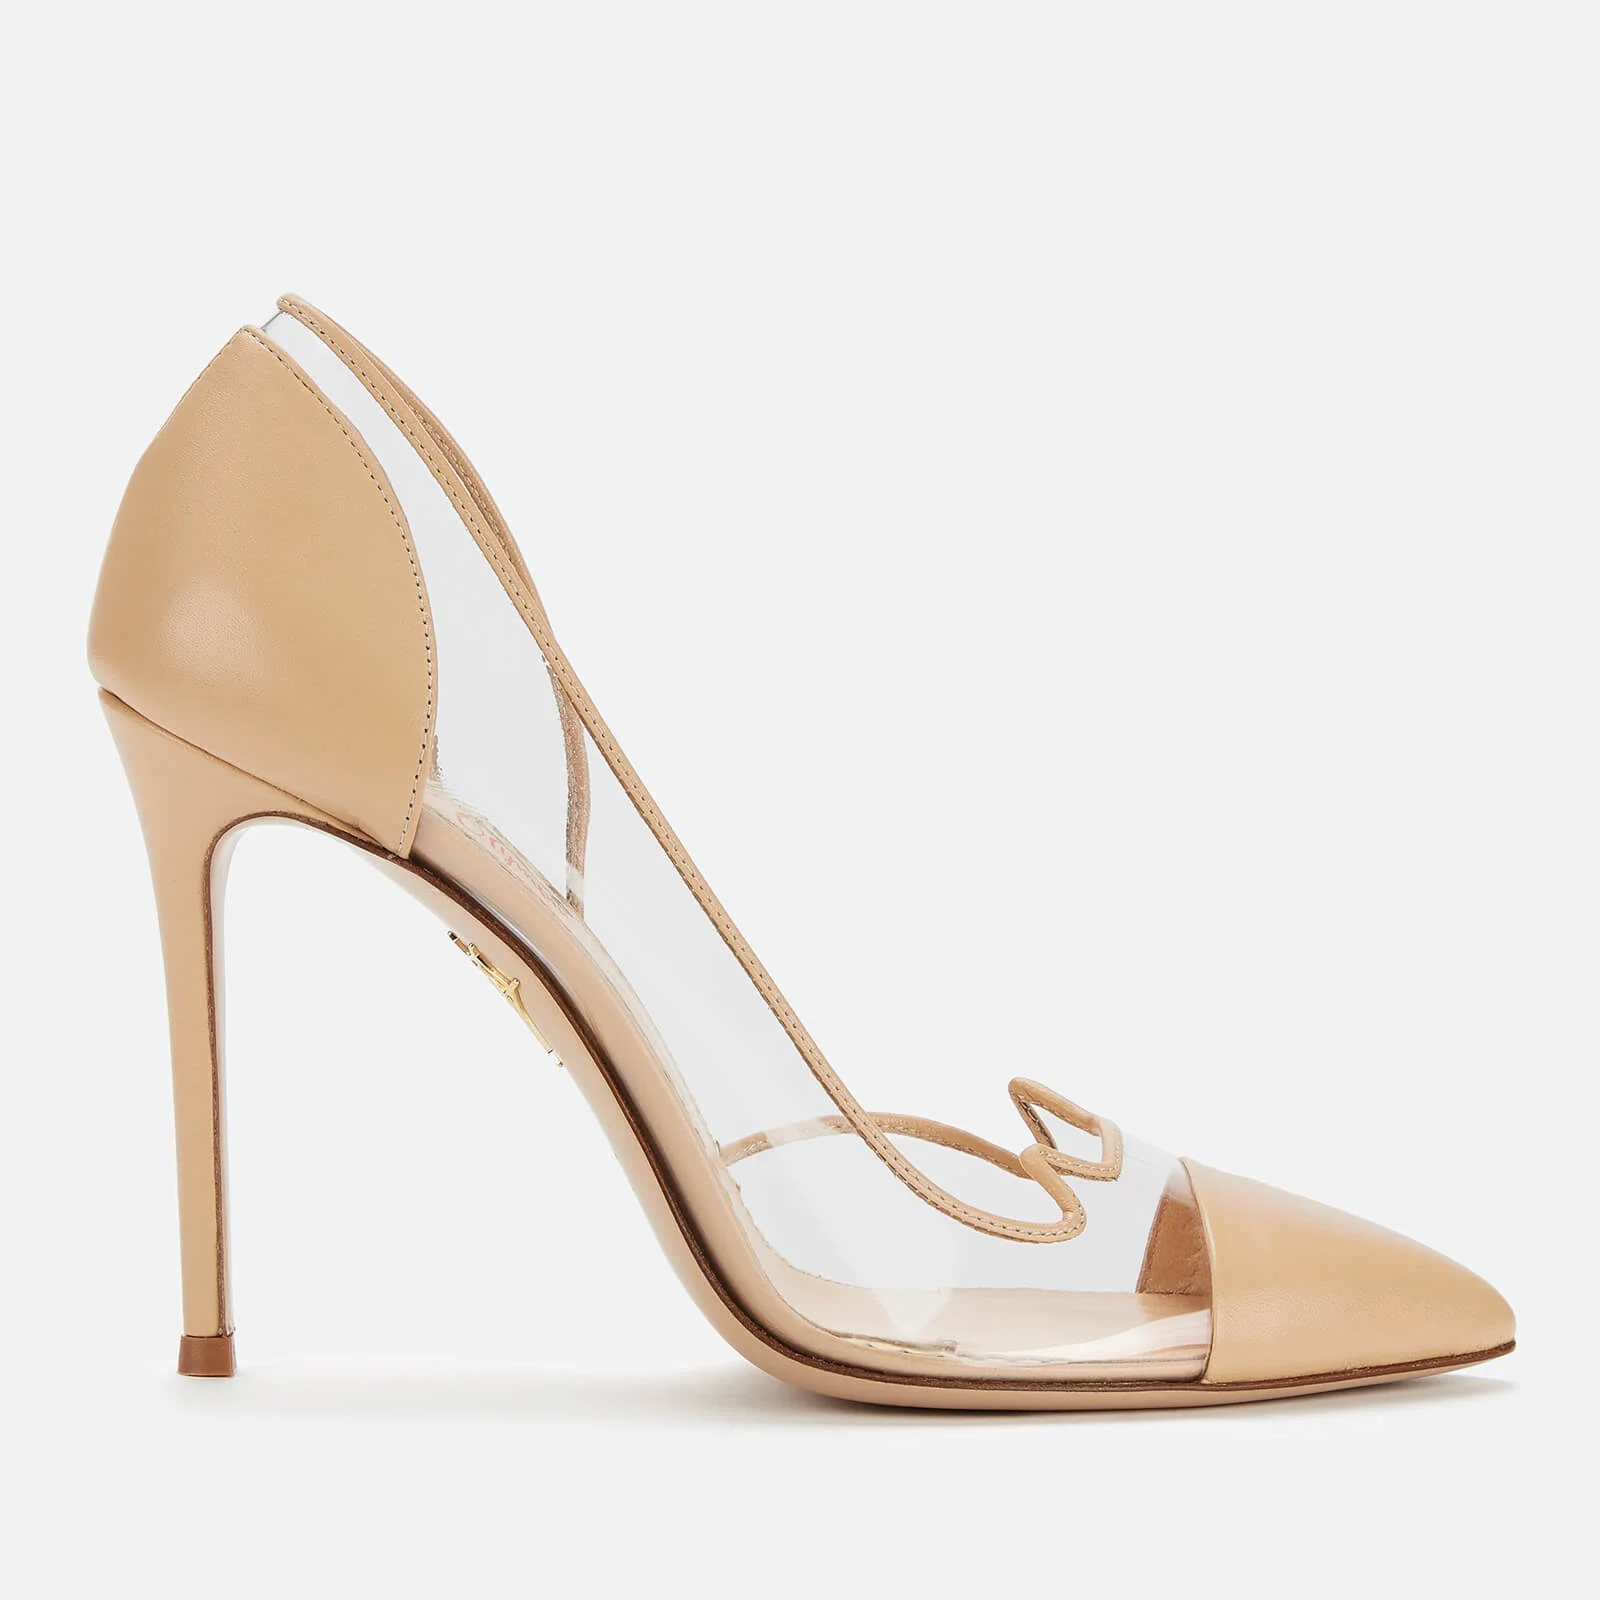 Charlotte Olympia Women's Kitty Court Shoes - Crumble/Transparent Image 1